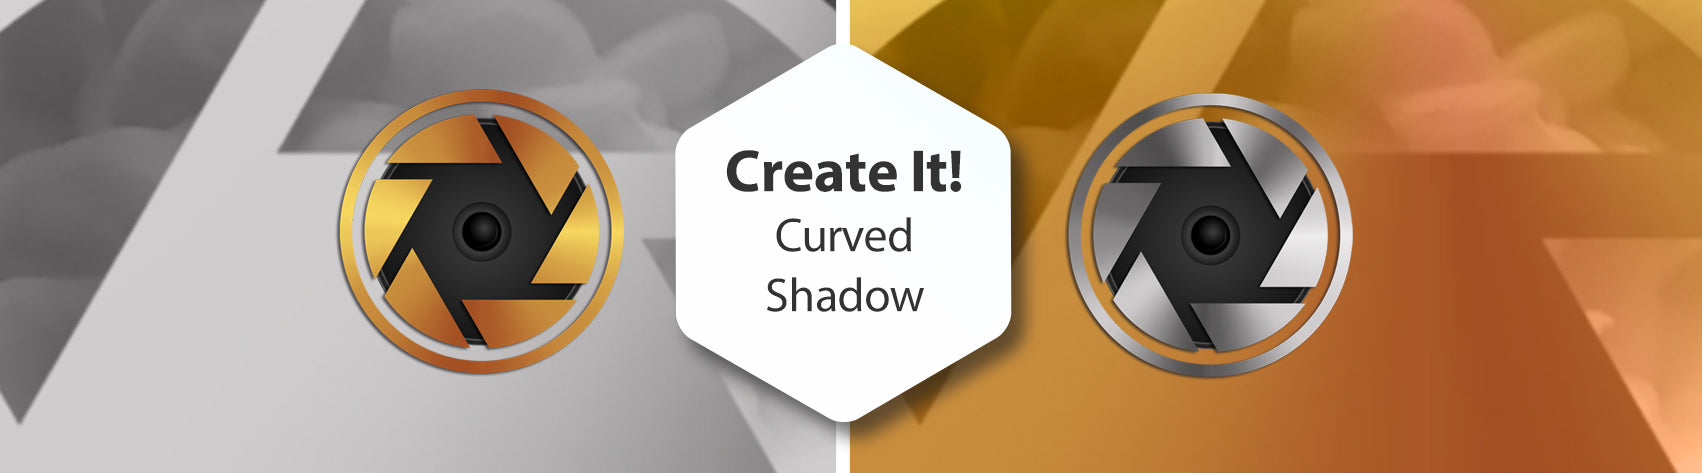 Create It! Creating a Curved Shadow